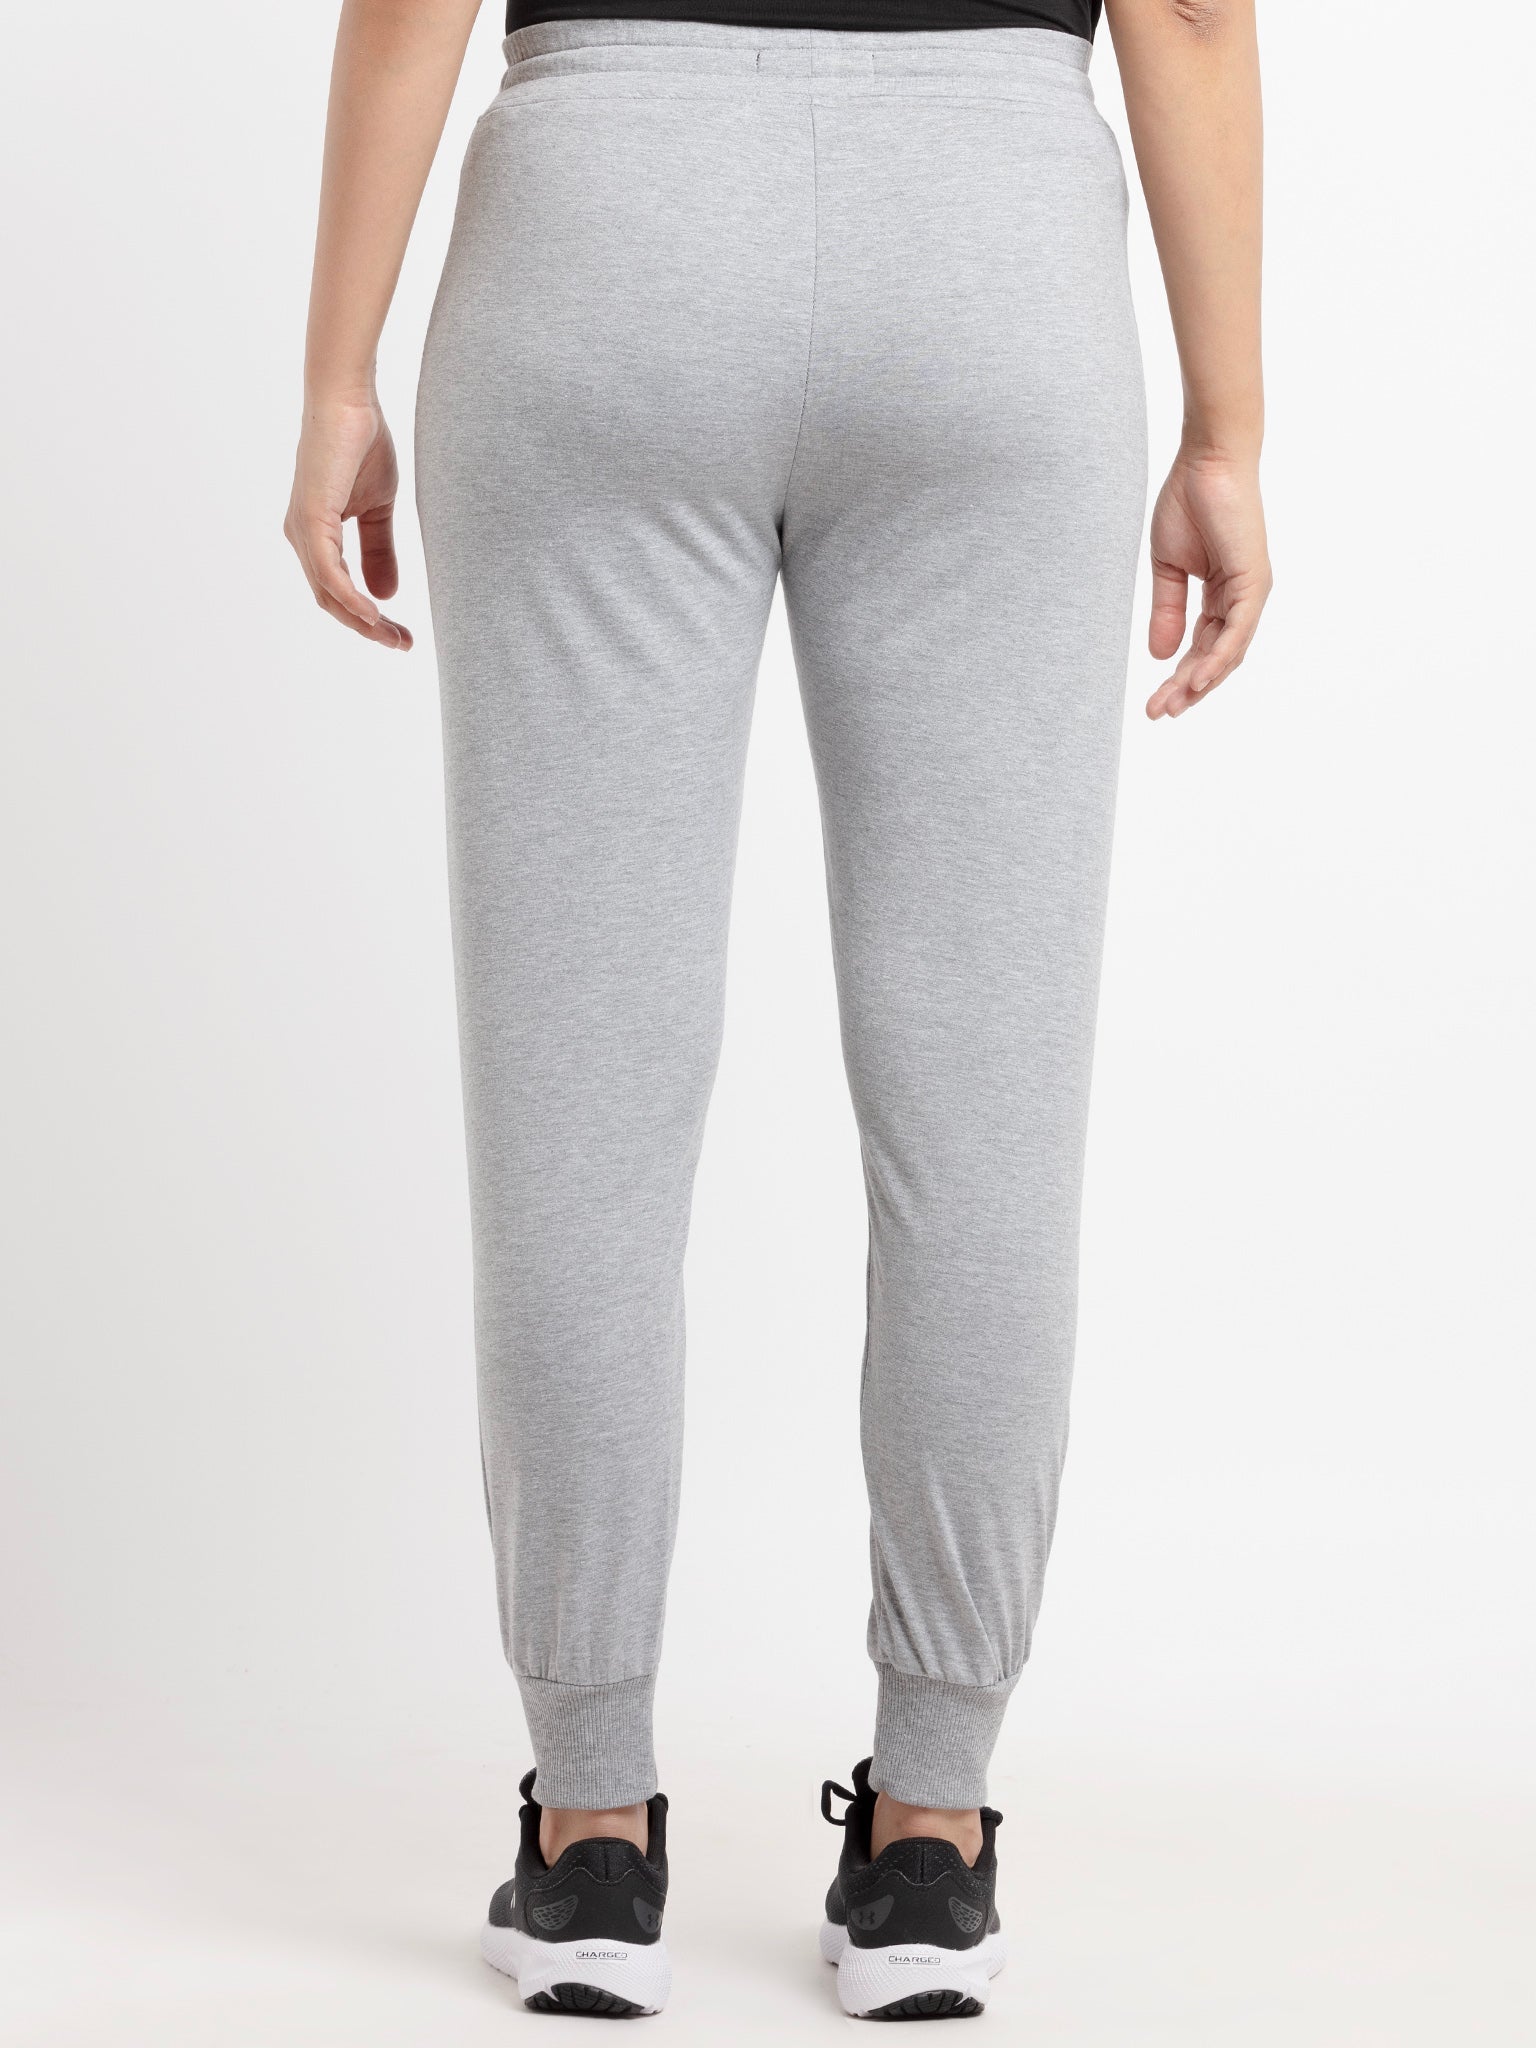 Women'ss Full length Solid Joggers